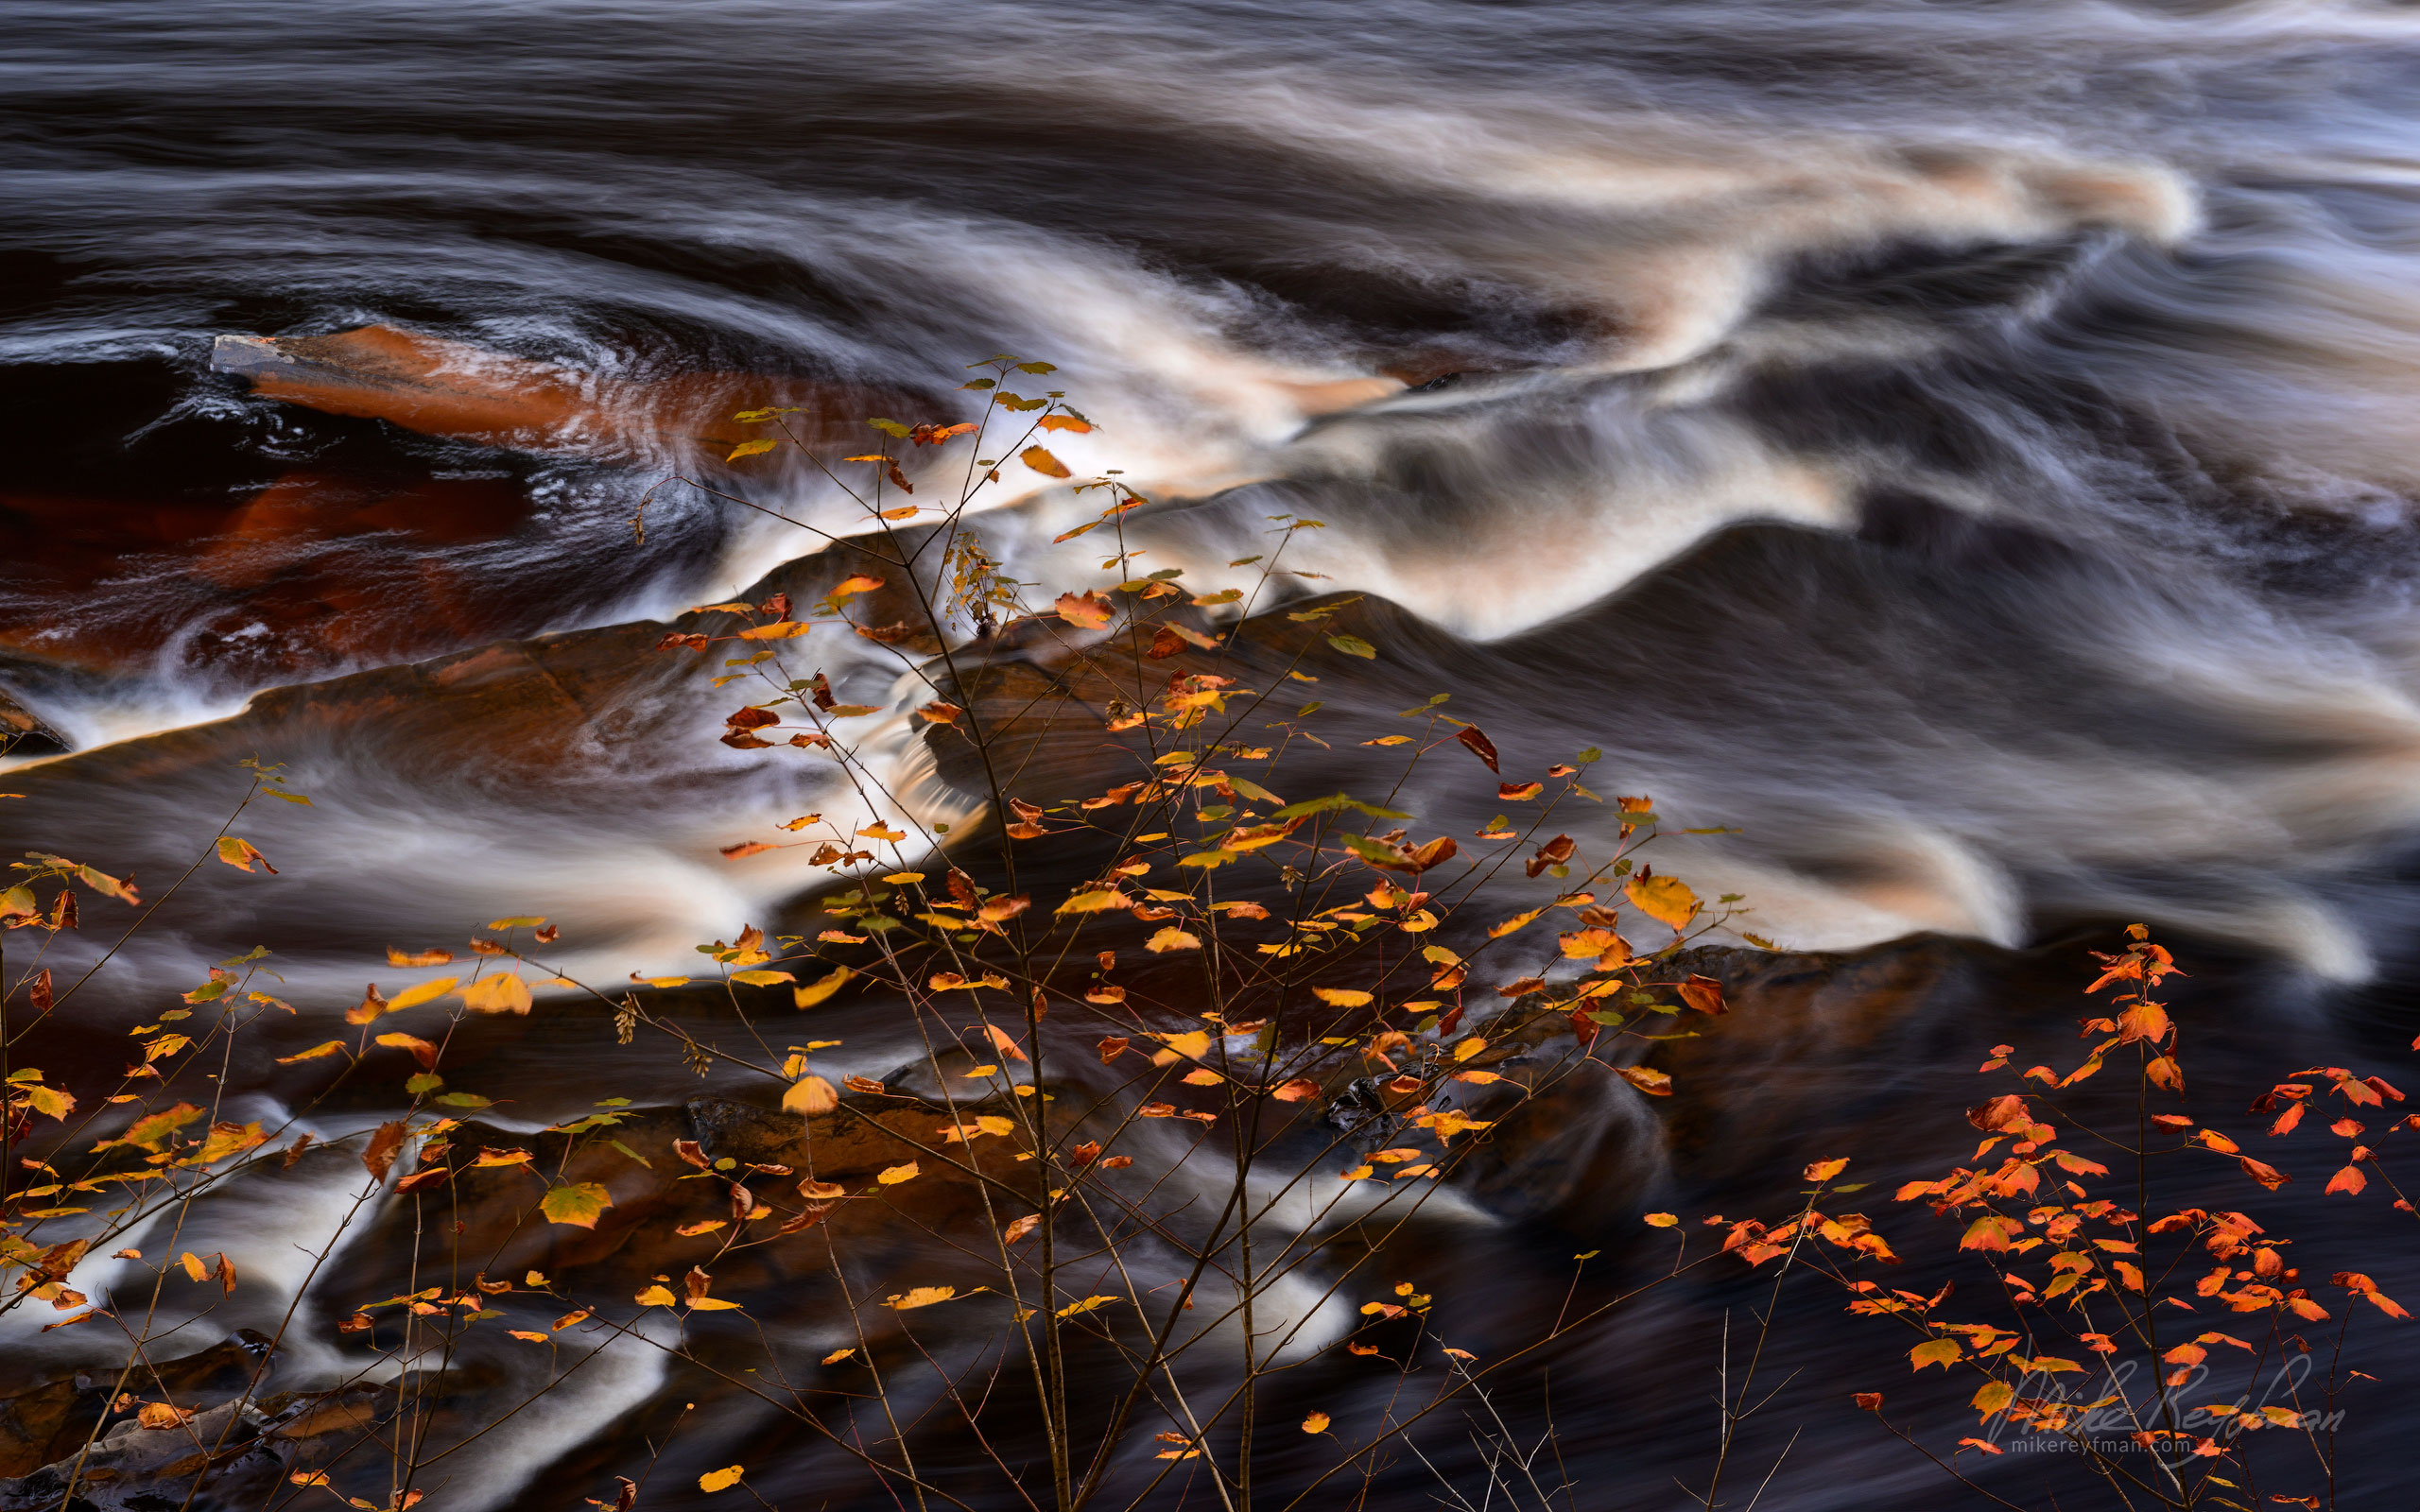 Presque Isle River, Porcupine Mountains, Upper Peninsula, Michigan, USA. UP-MI_034_ZRA7768.jpg - Michigan's Upper Peninsula - the best destination in US for fall colors. - Mike Reyfman Photography